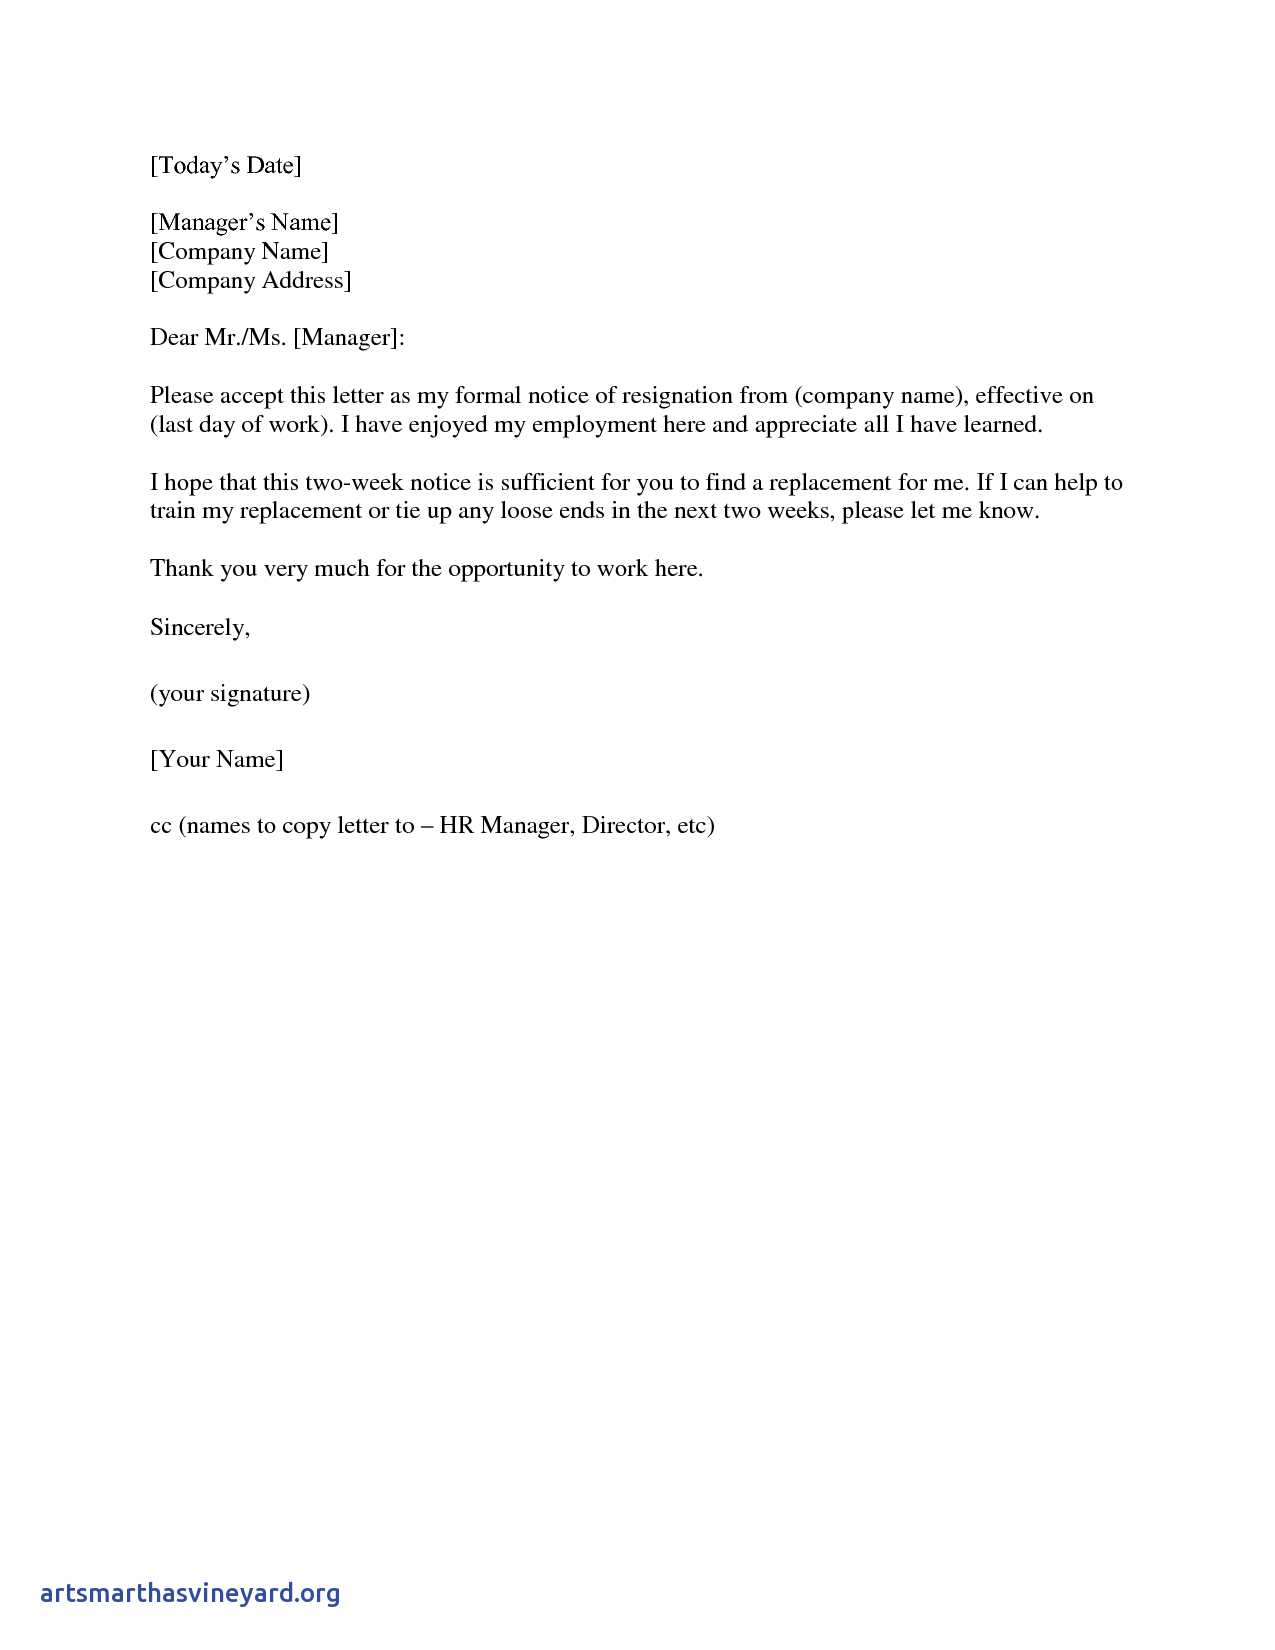 Official Letter Of Resignation Template - 2 Weeks Notice Letter Resignation Letter 2 Week Notice From Two Week